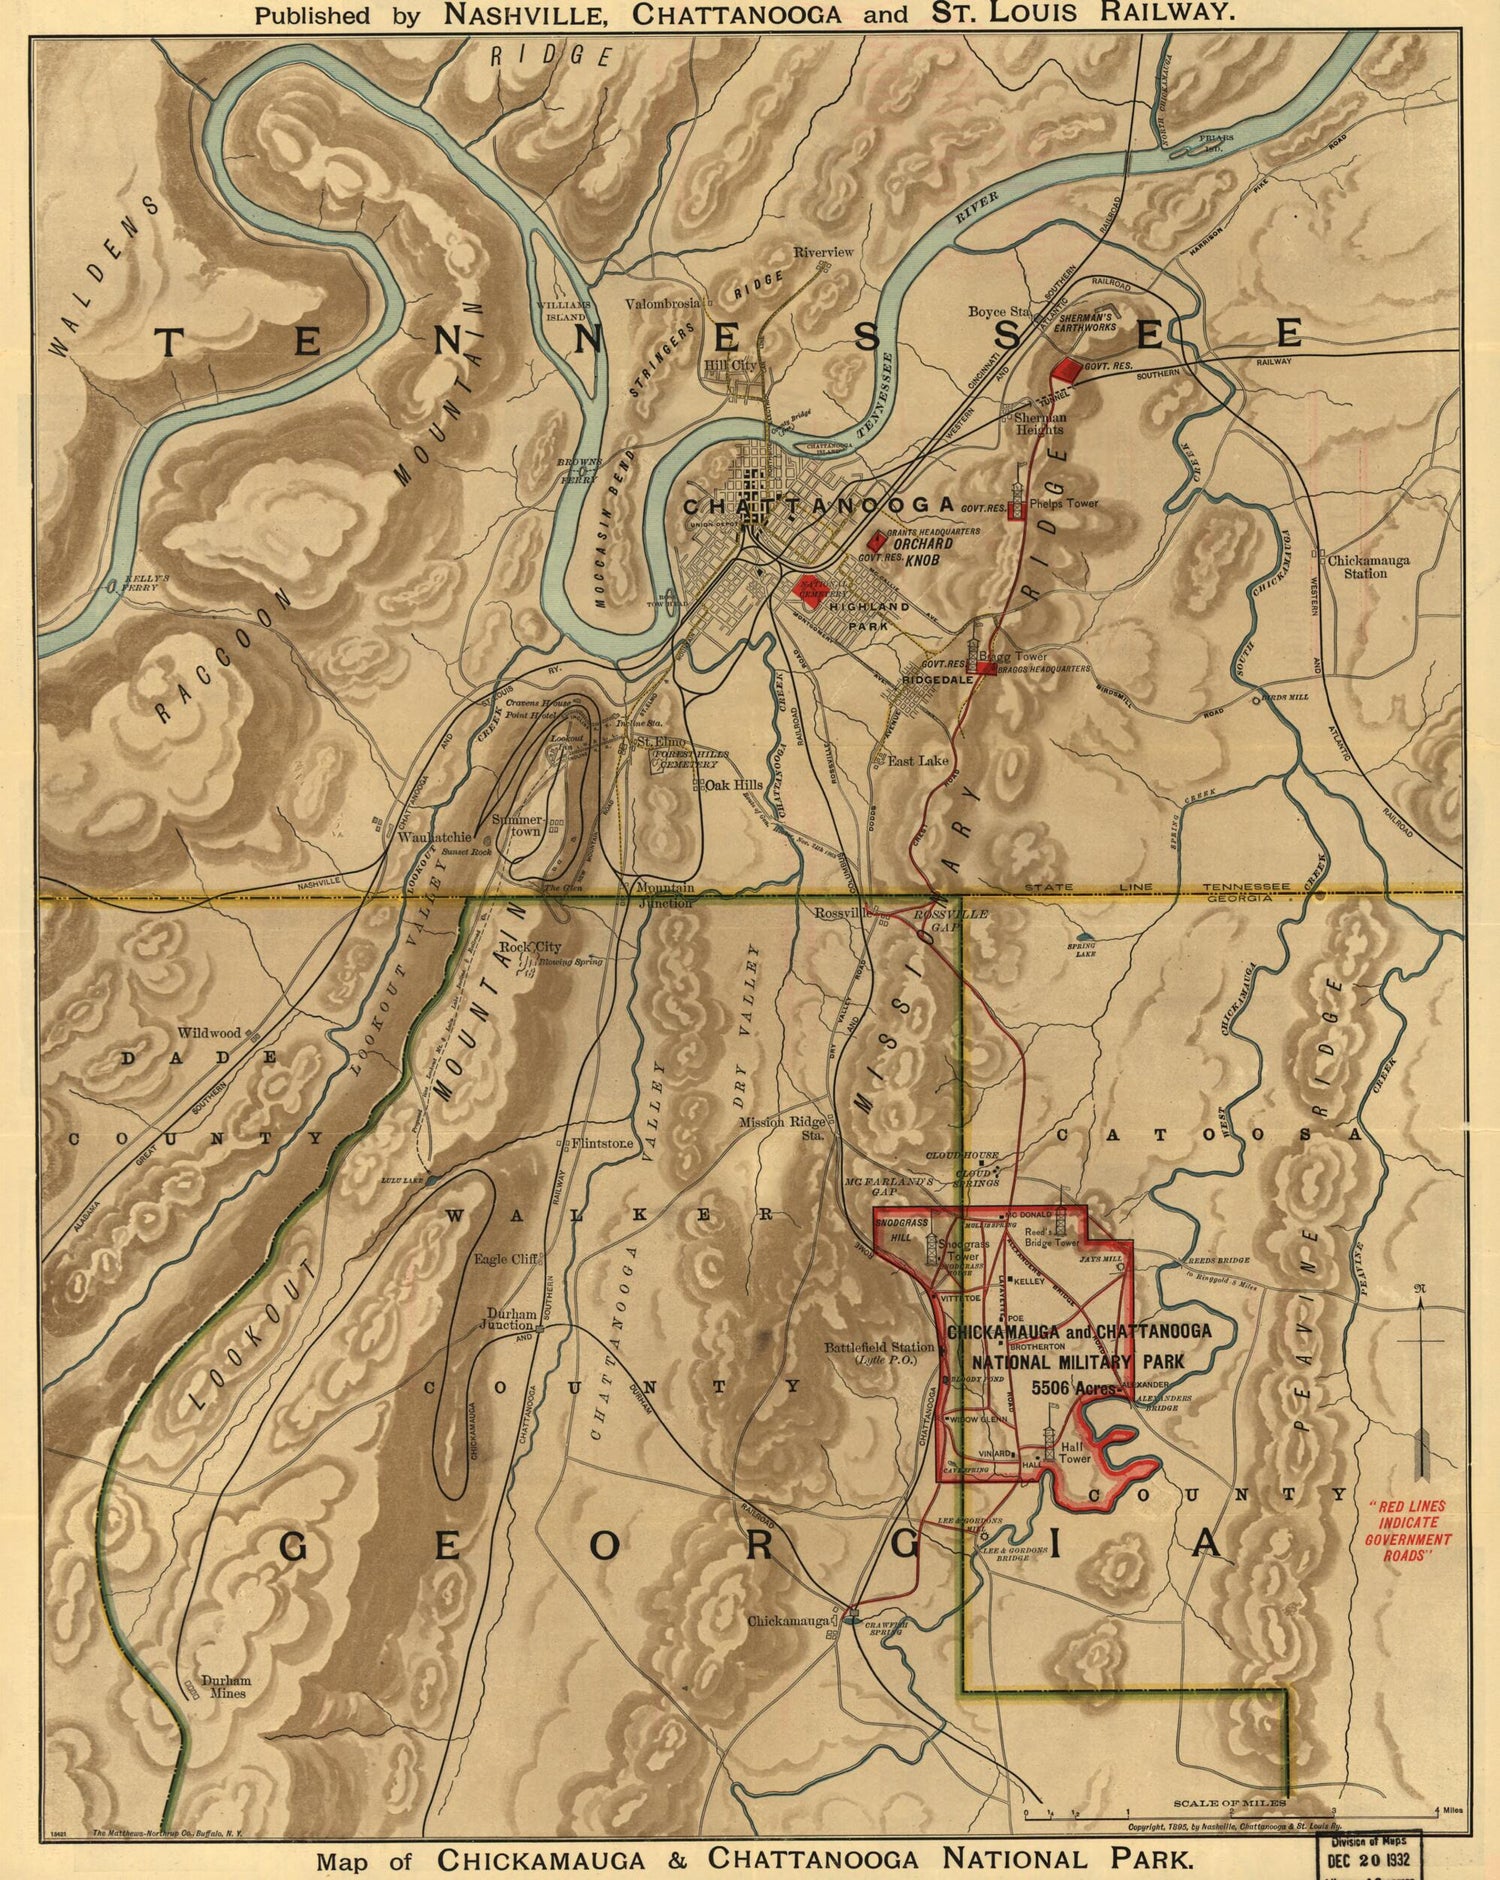 This old map of Map of Chickamauga &amp; Chattanooga National Park (War Route to Chickamauga. Dedication Chickamauga and Chattanooga National Park, September 18, 19, and 20, from 1895) was created by Chattanooga Nashville in 1895